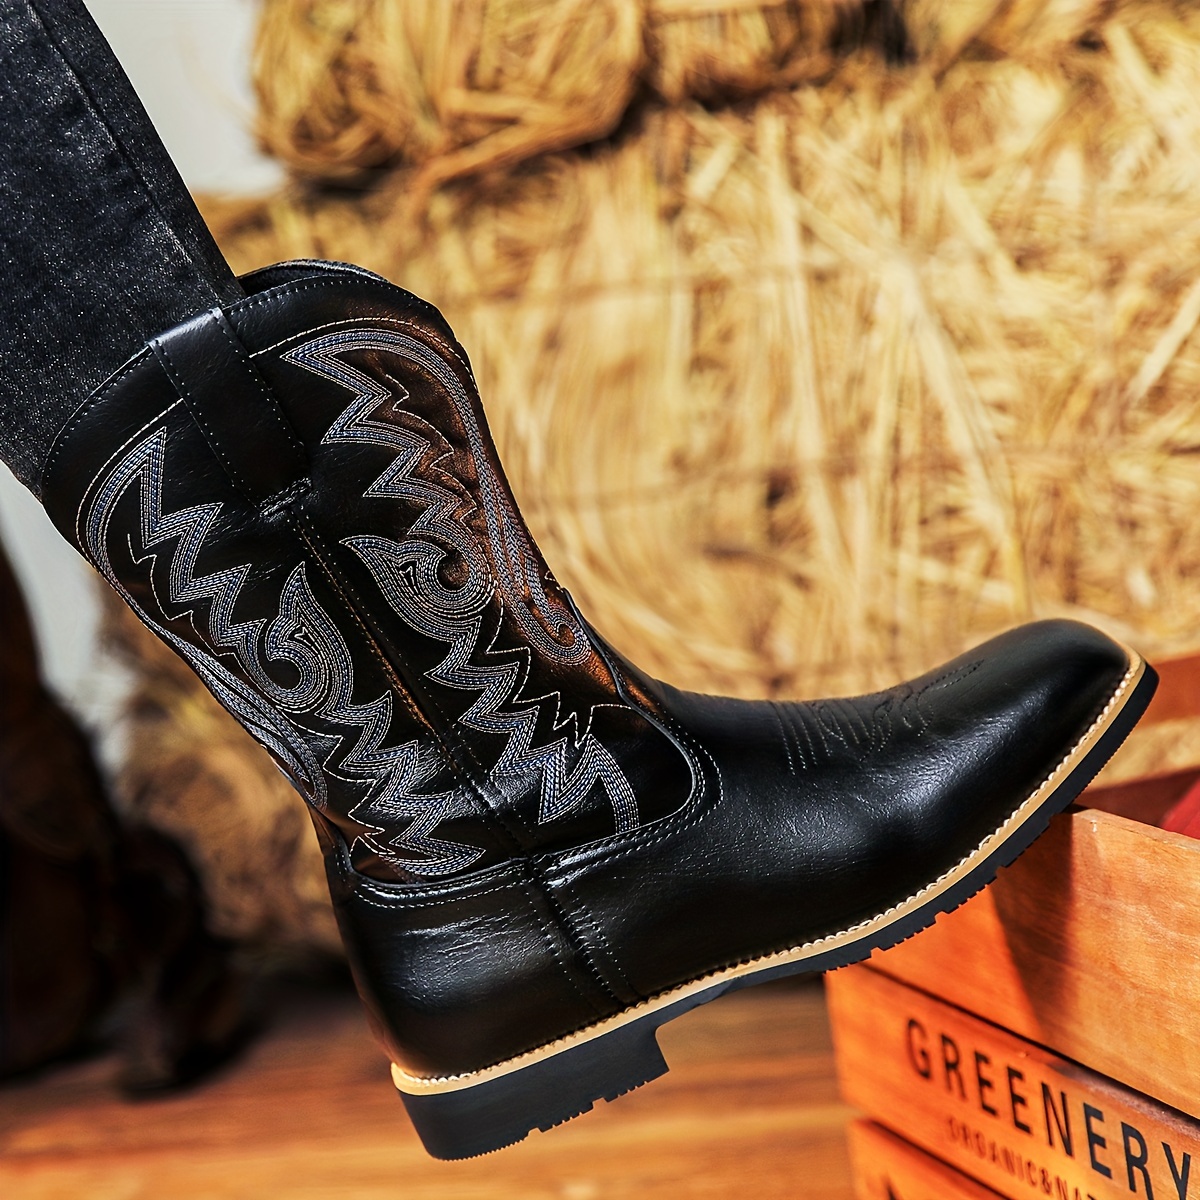 Durable Work Boots, Western Boots and More